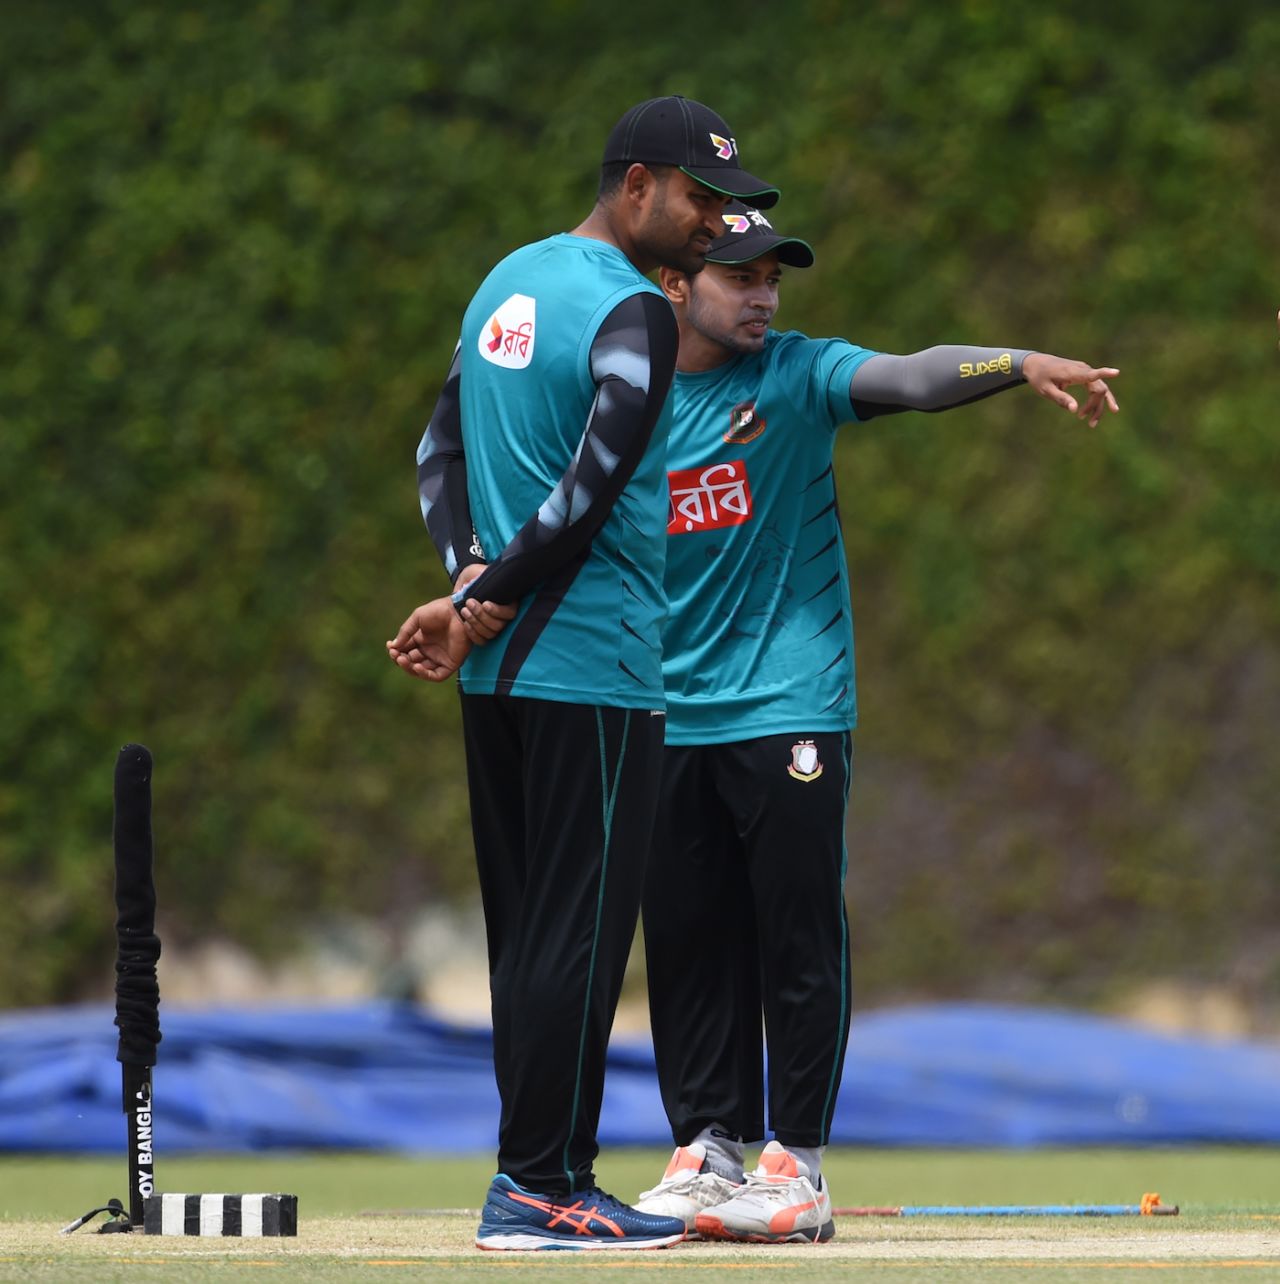 Mushfiqur Rahim and Tamim Iqbal inspect the pitch during a practice session, P. Sara Oval Cricket Stadium, Colombo, March 14, 2017